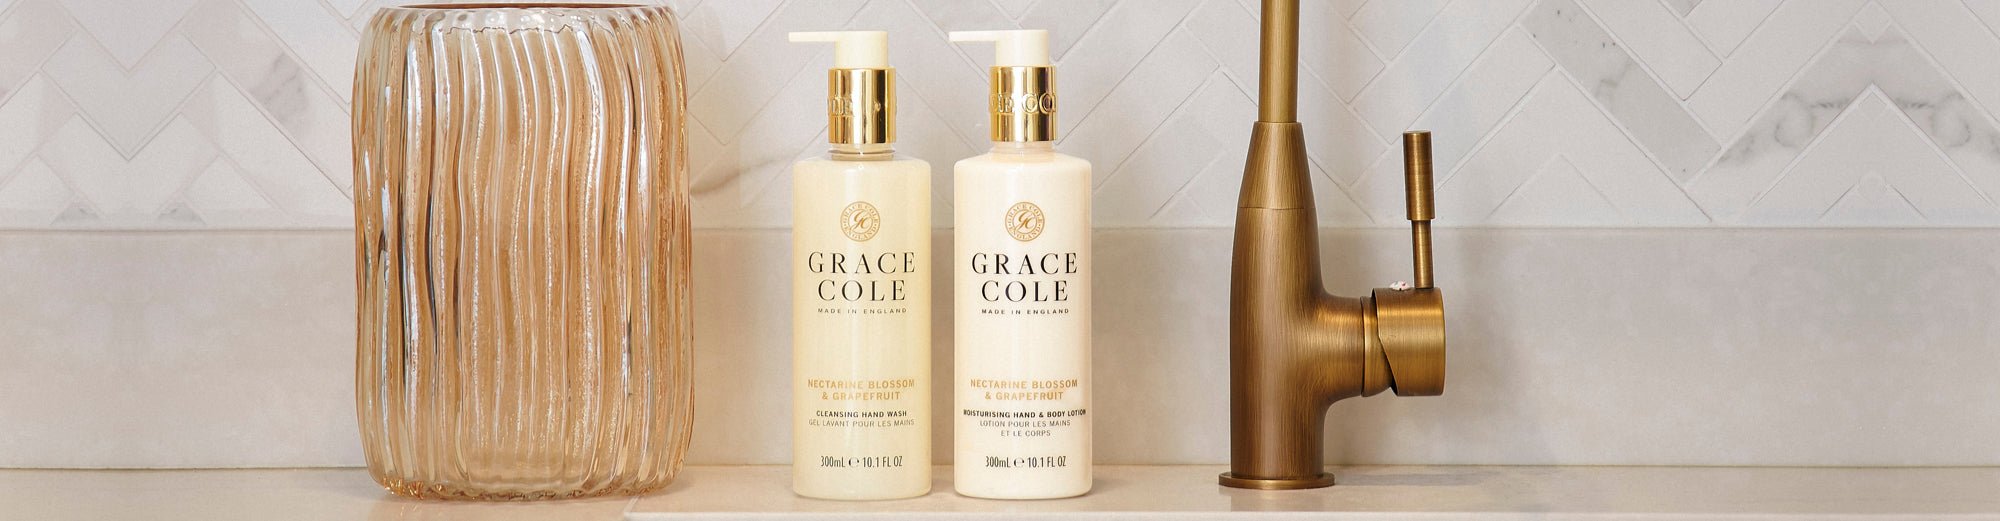 Grace Cole Hand & Nailcare